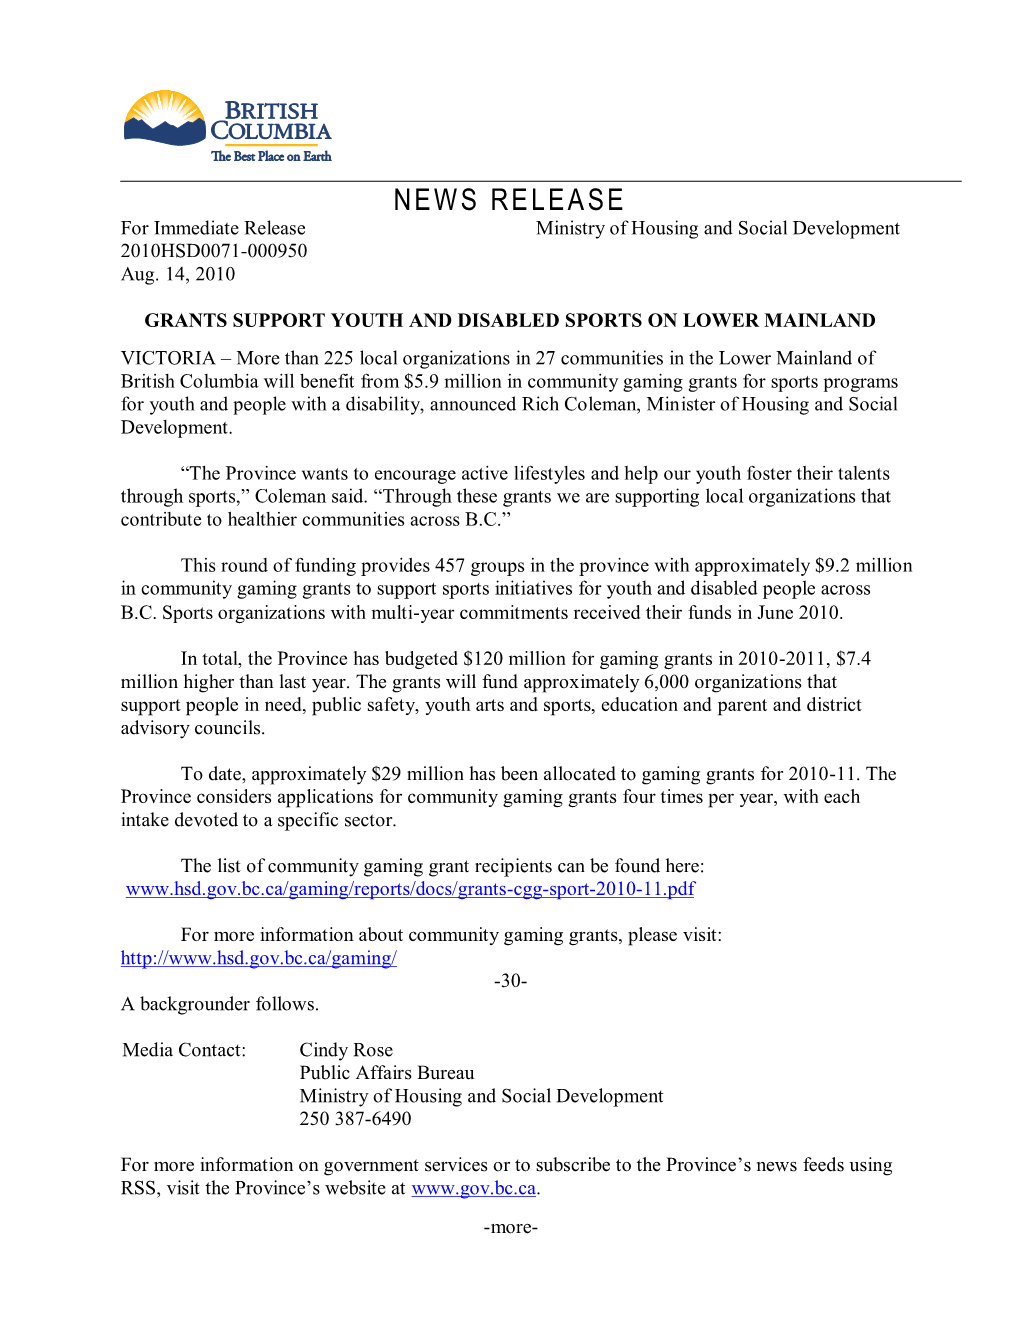 NEWS RELEASE for Immediate Release Ministry of Housing and Social Development 2010HSD0071-000950 Aug